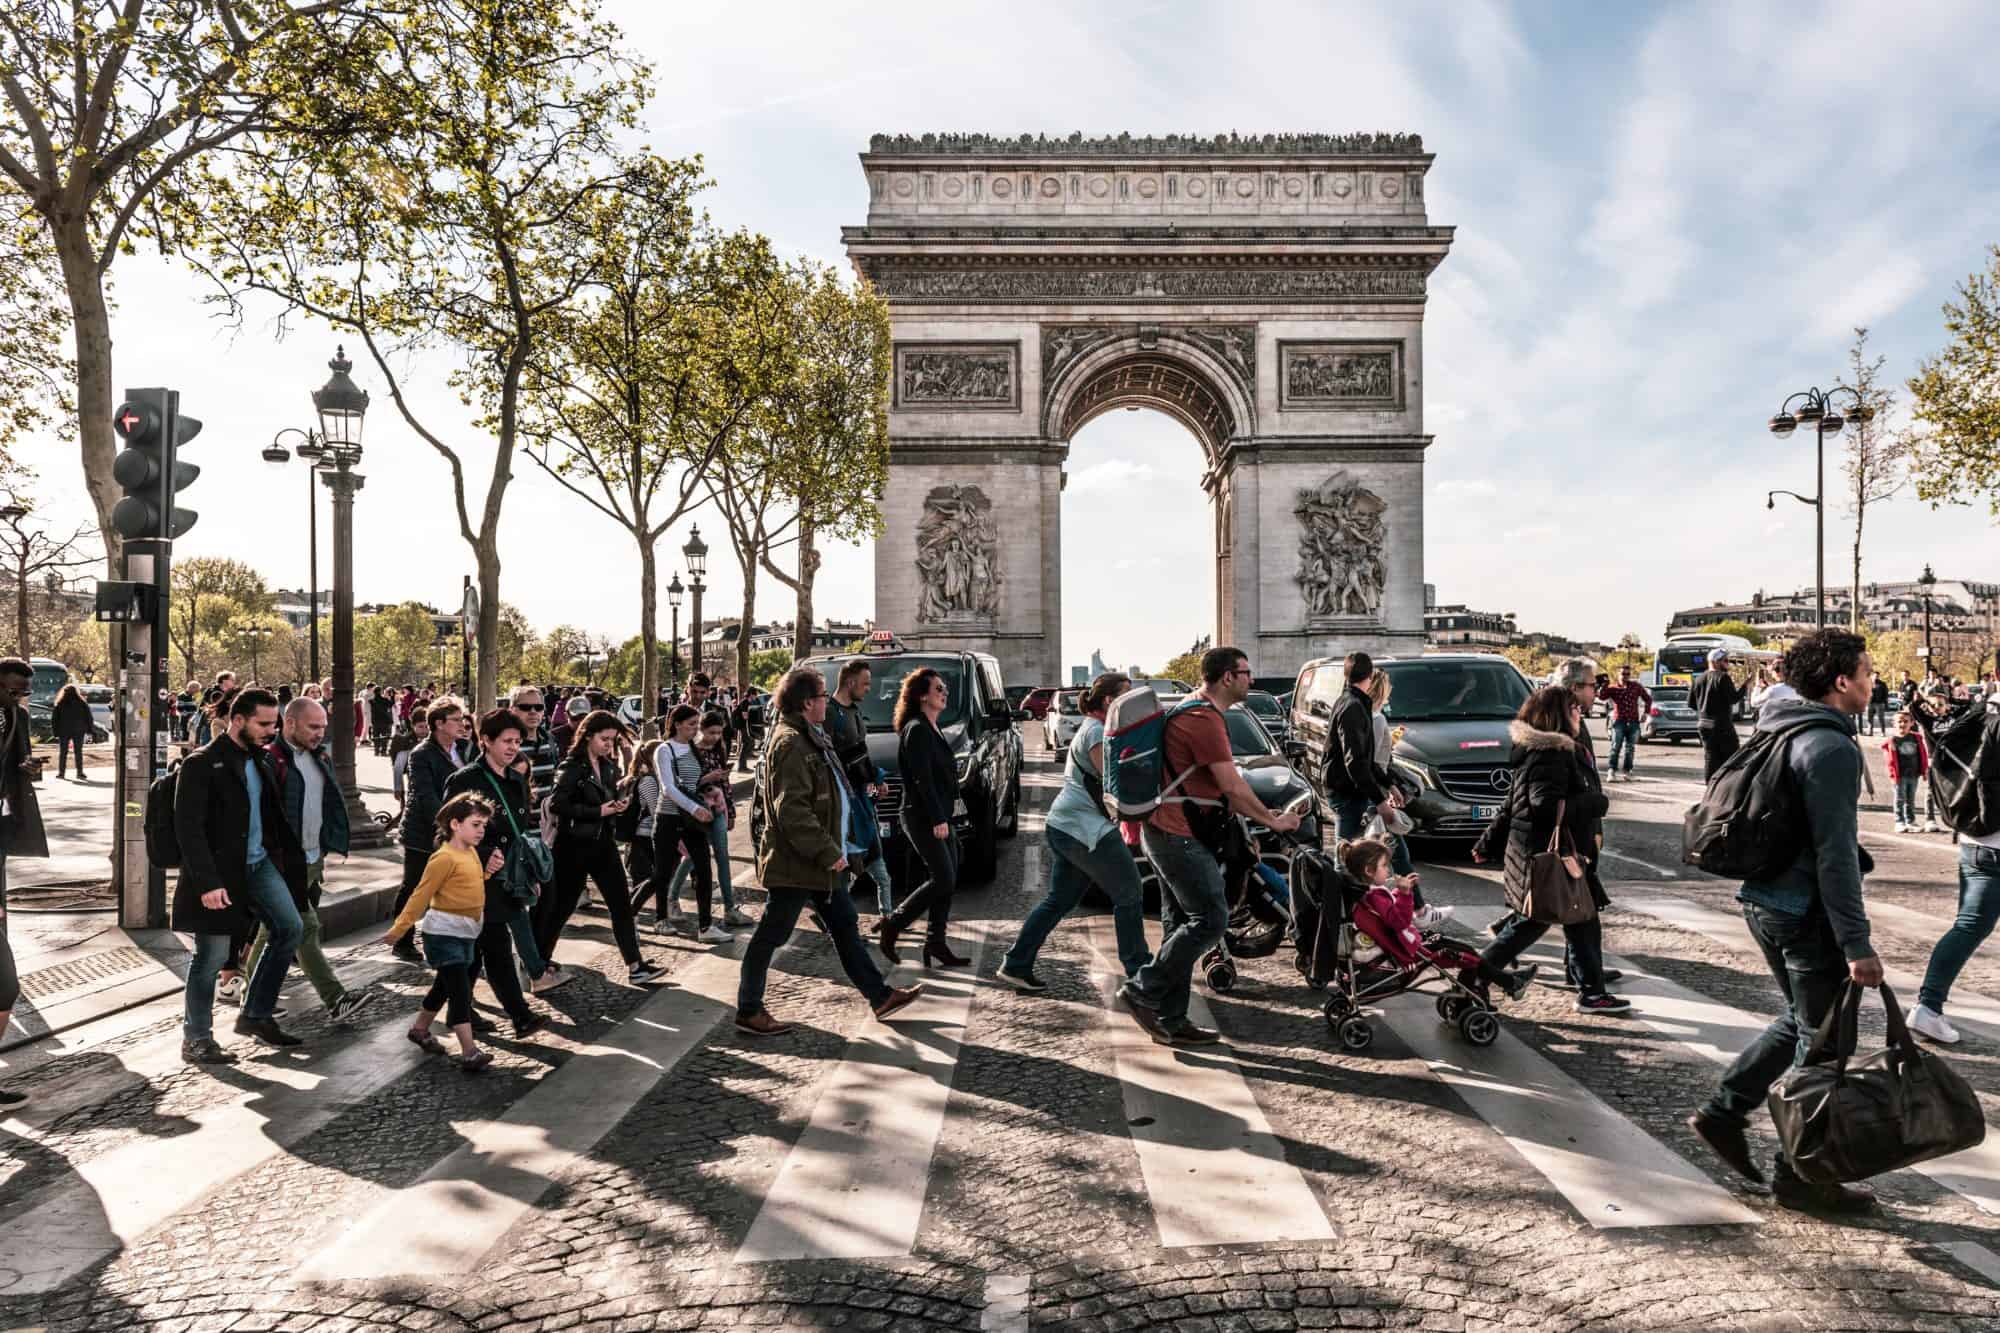 Getting Around Paris and France During the Strikes